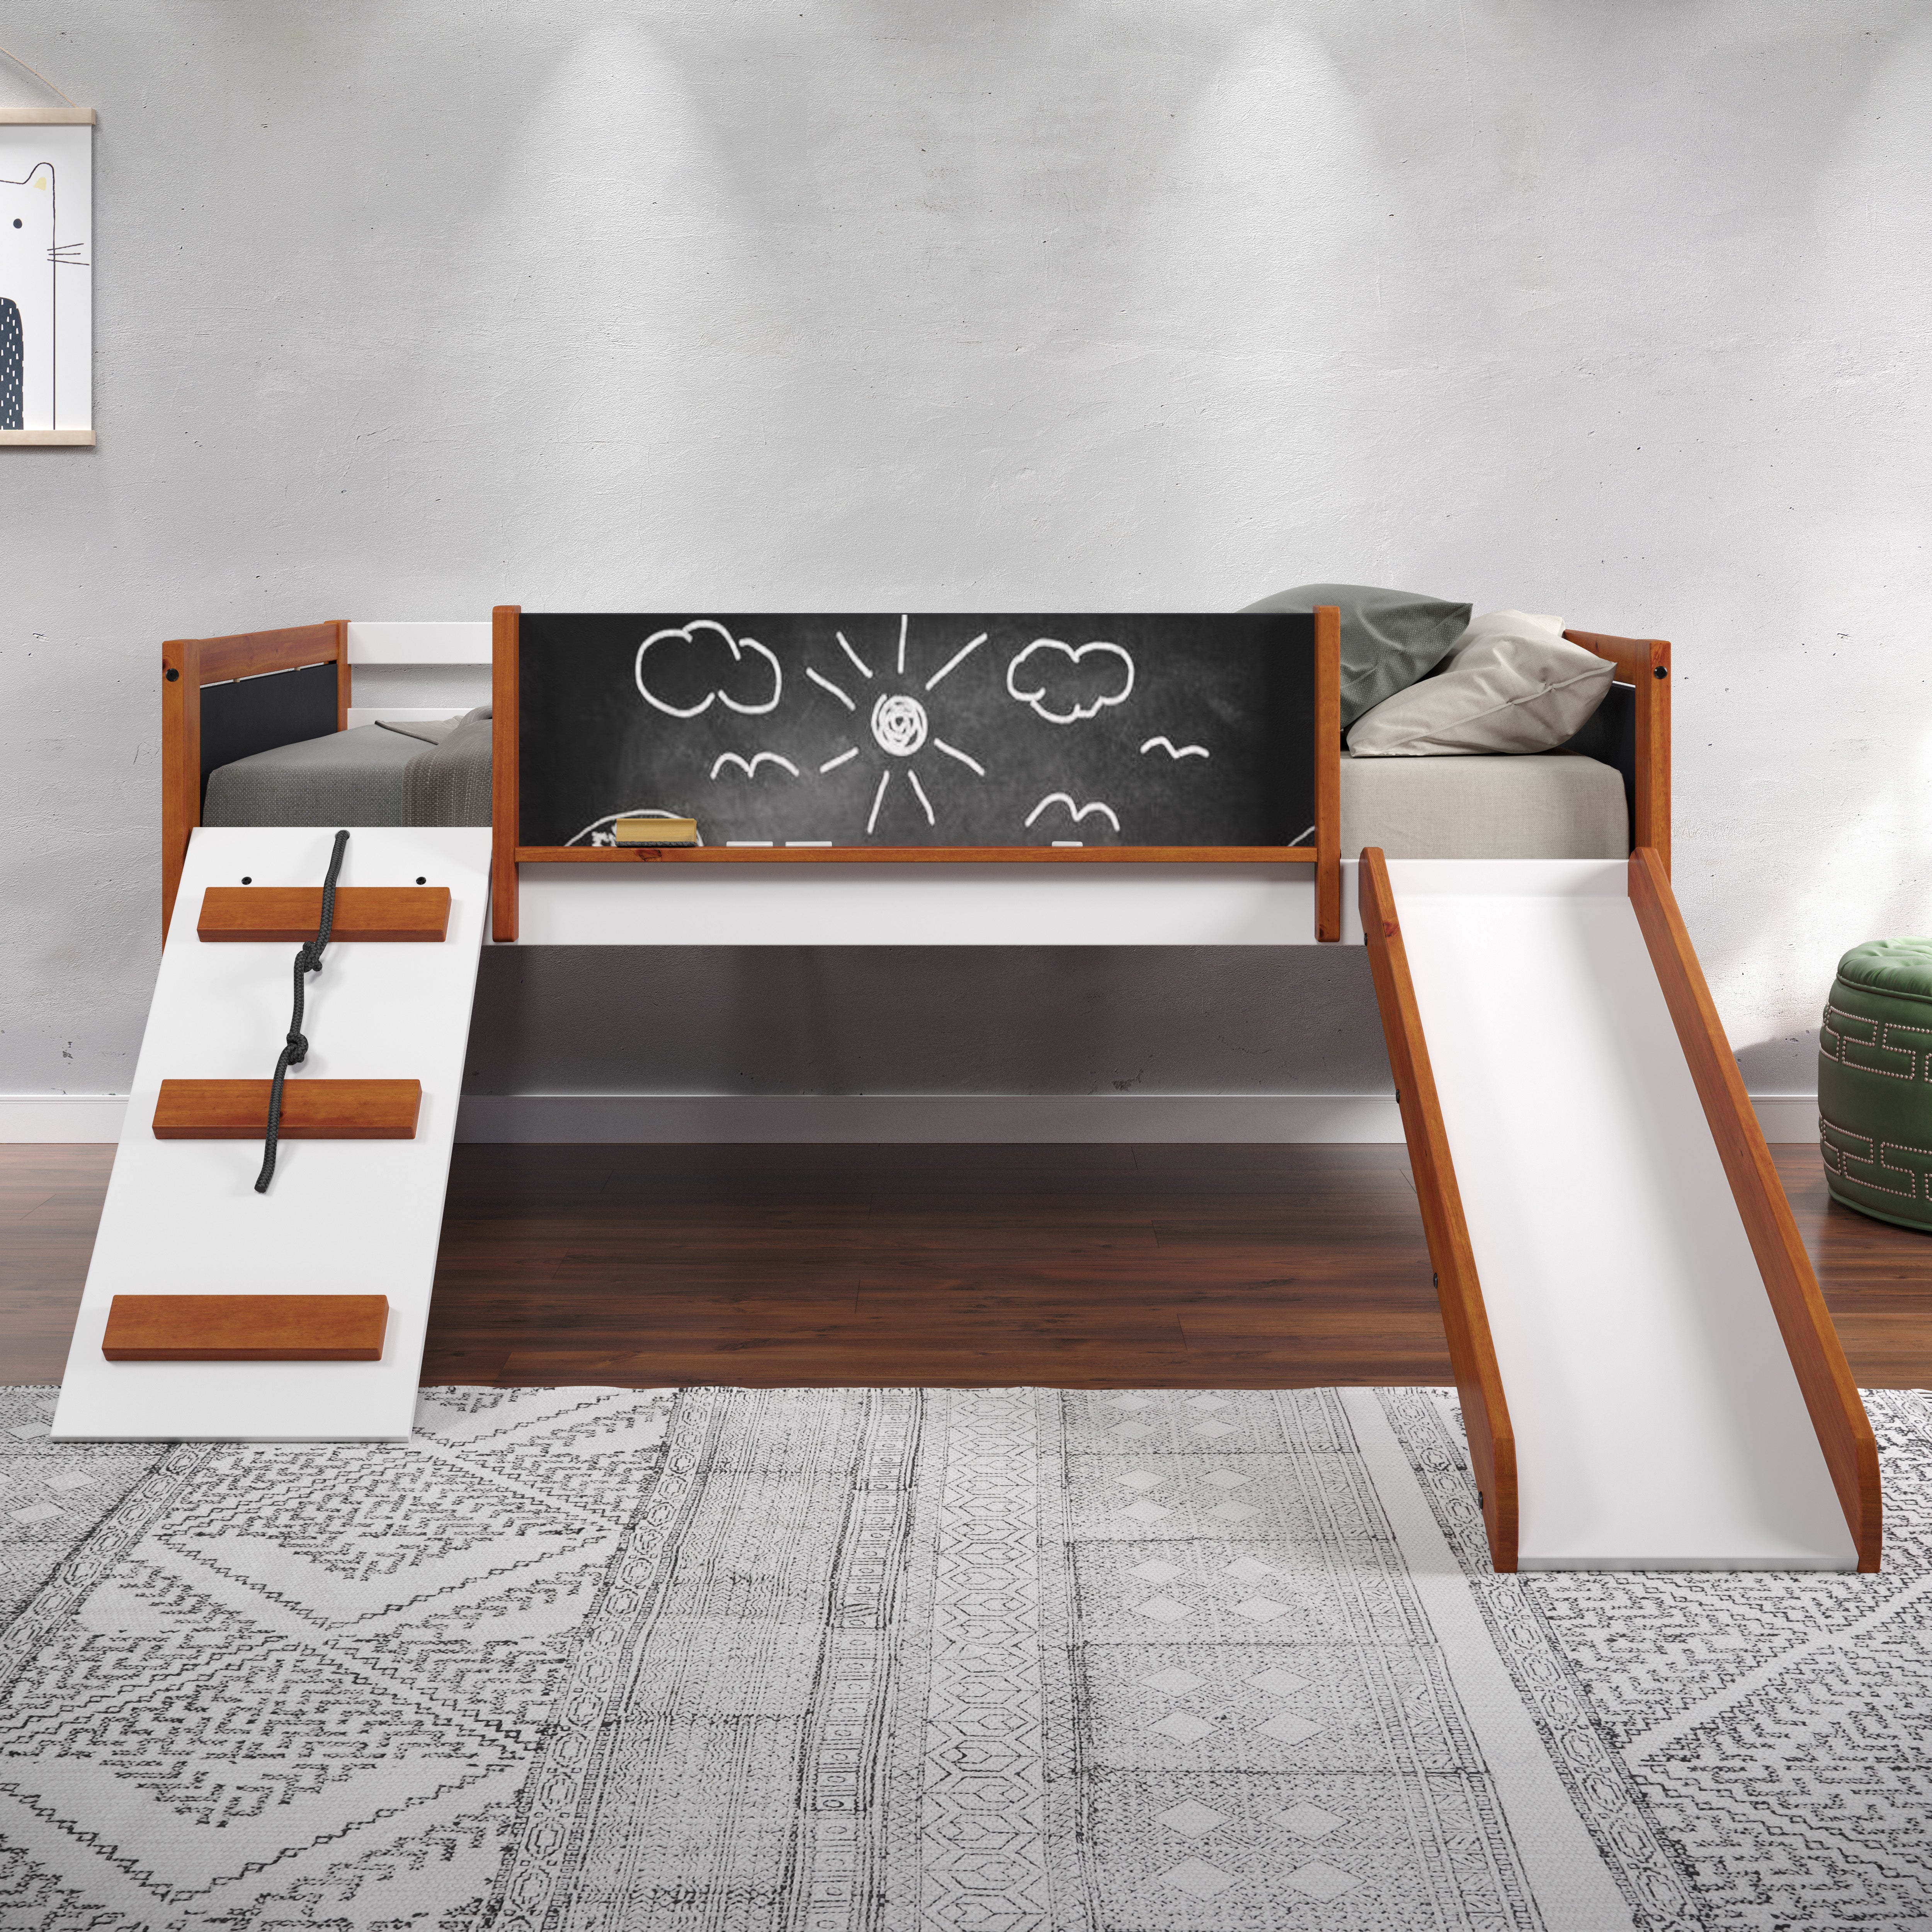 Bellemave® Twin Size Low Loft Bed with Slide and Climbing Ladder Bellemave®